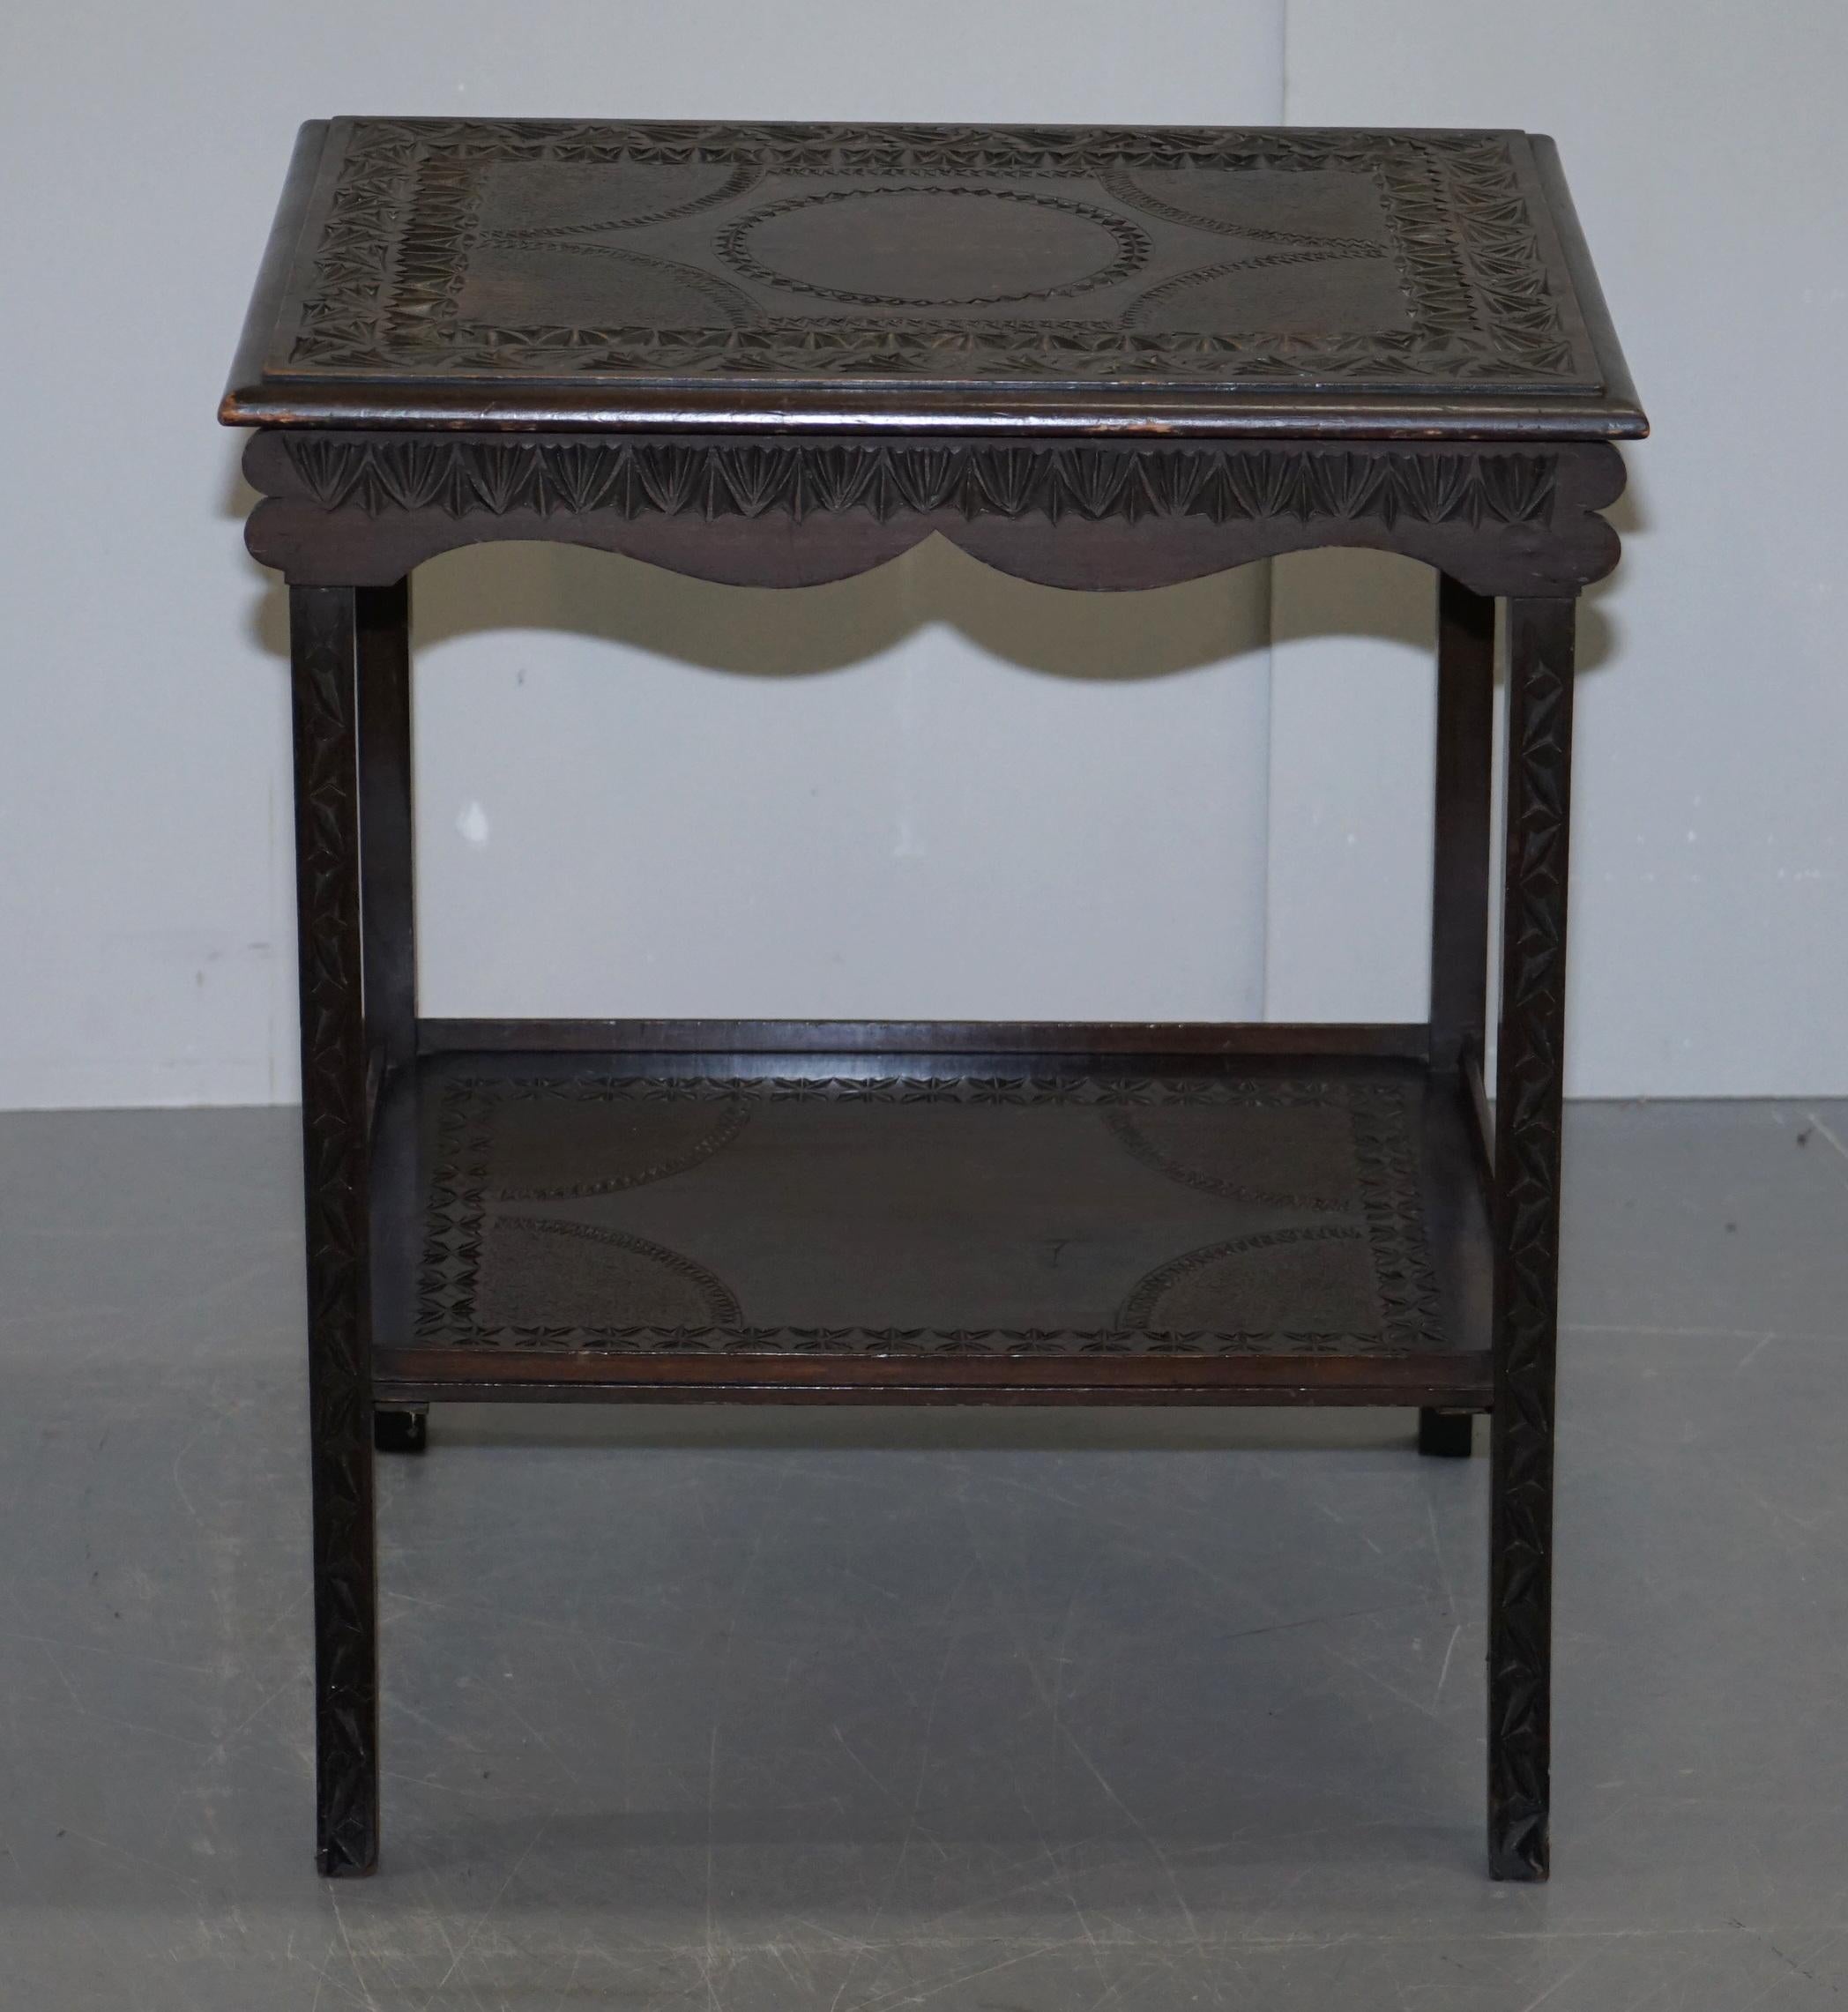 We are delighted to offer for sale this very nice circa 1880-1900 Anglo Indian heavily carved occasional silver or tea table

A good looking and well made piece, it has been ornately carved from top to bottom and is in very fine order